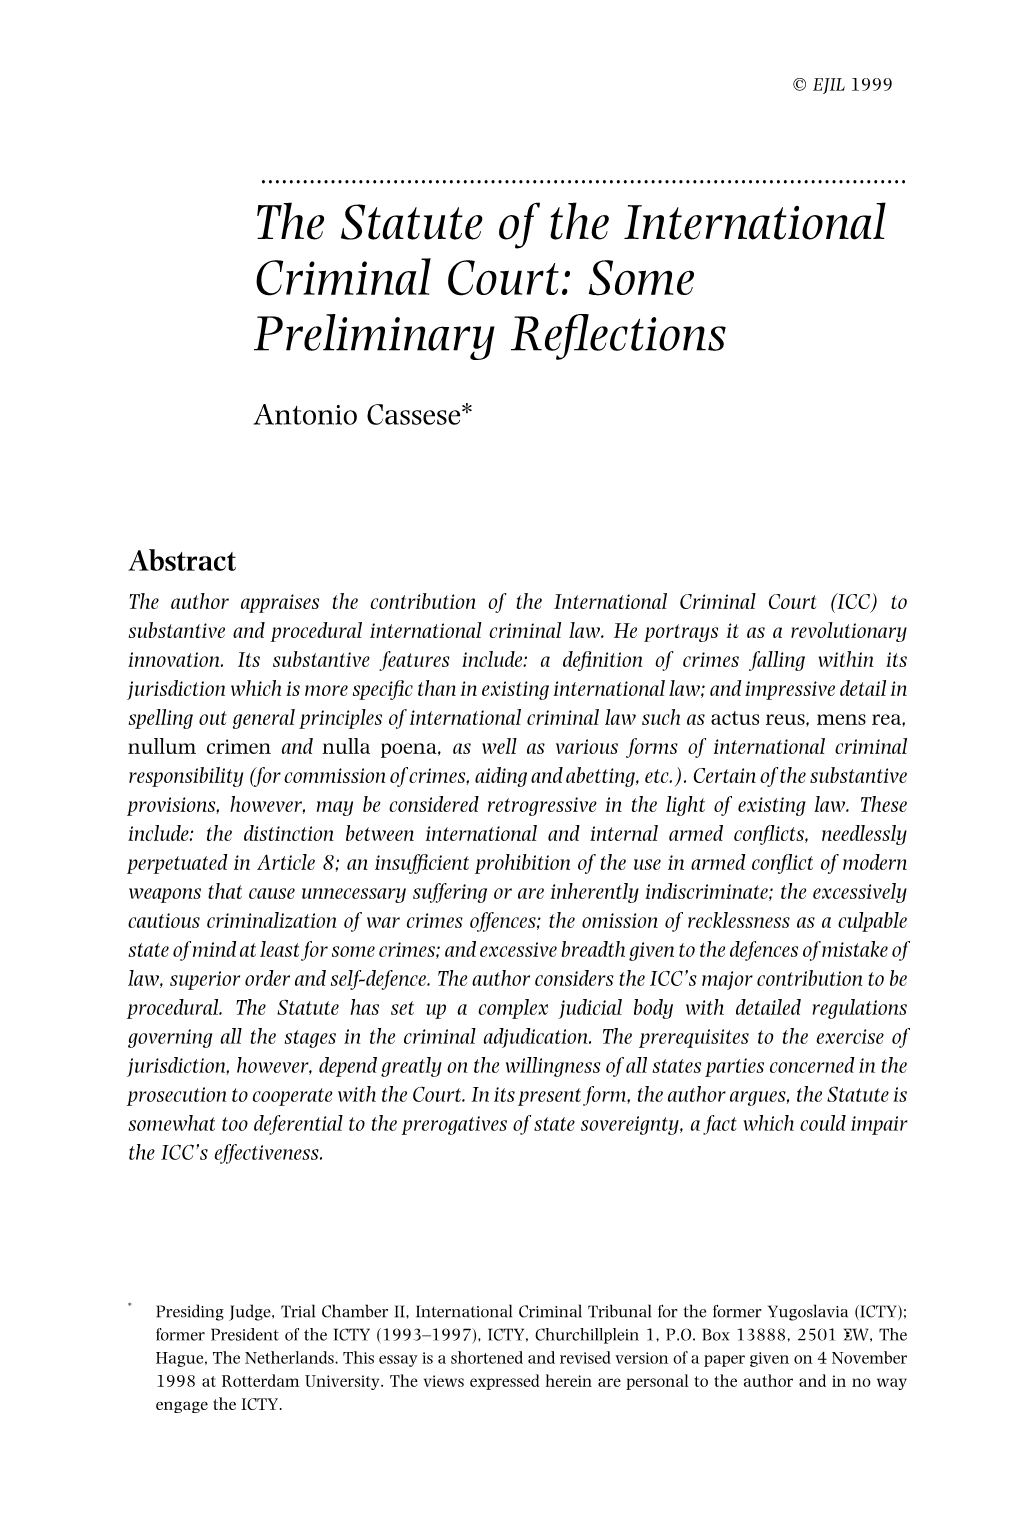 The Statute of the International Criminal Court: Some Preliminary Reﬂections